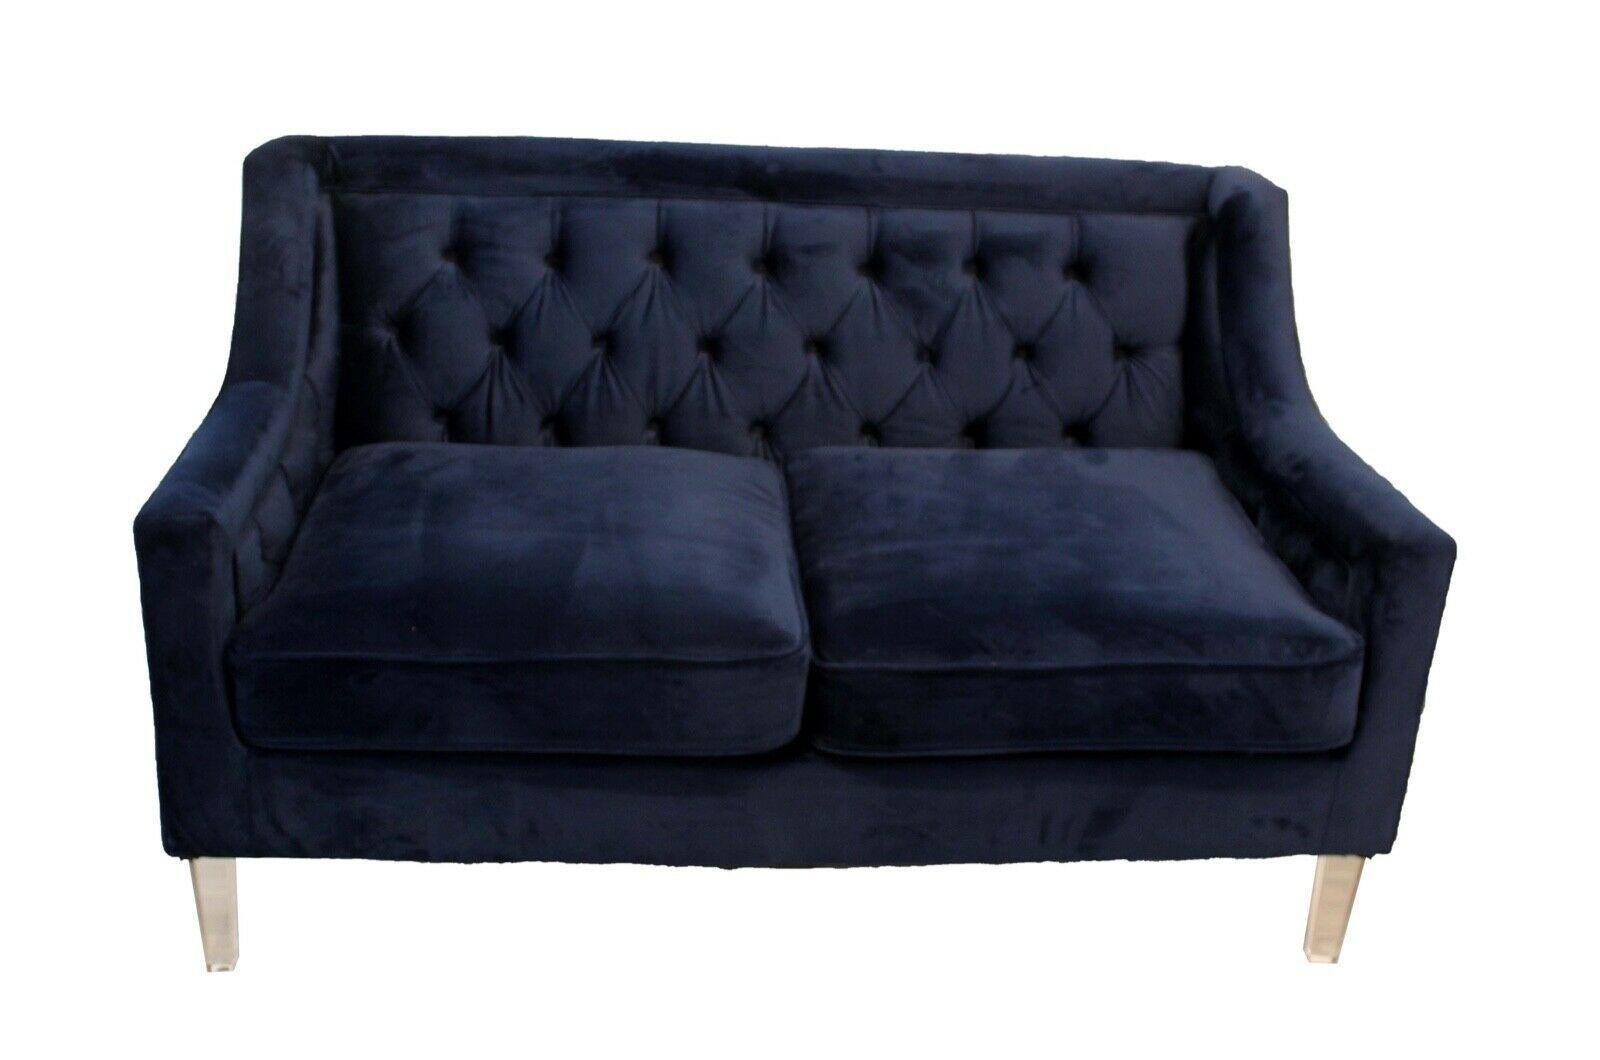 In a stunning cobalt blue velvet, this sofa and loveseat gives a nod to both traditional and modern making this the ideal transitional piece. Both the chair and sofa are detailed with modern lucite legs as well as classic tufted buttons on the back.